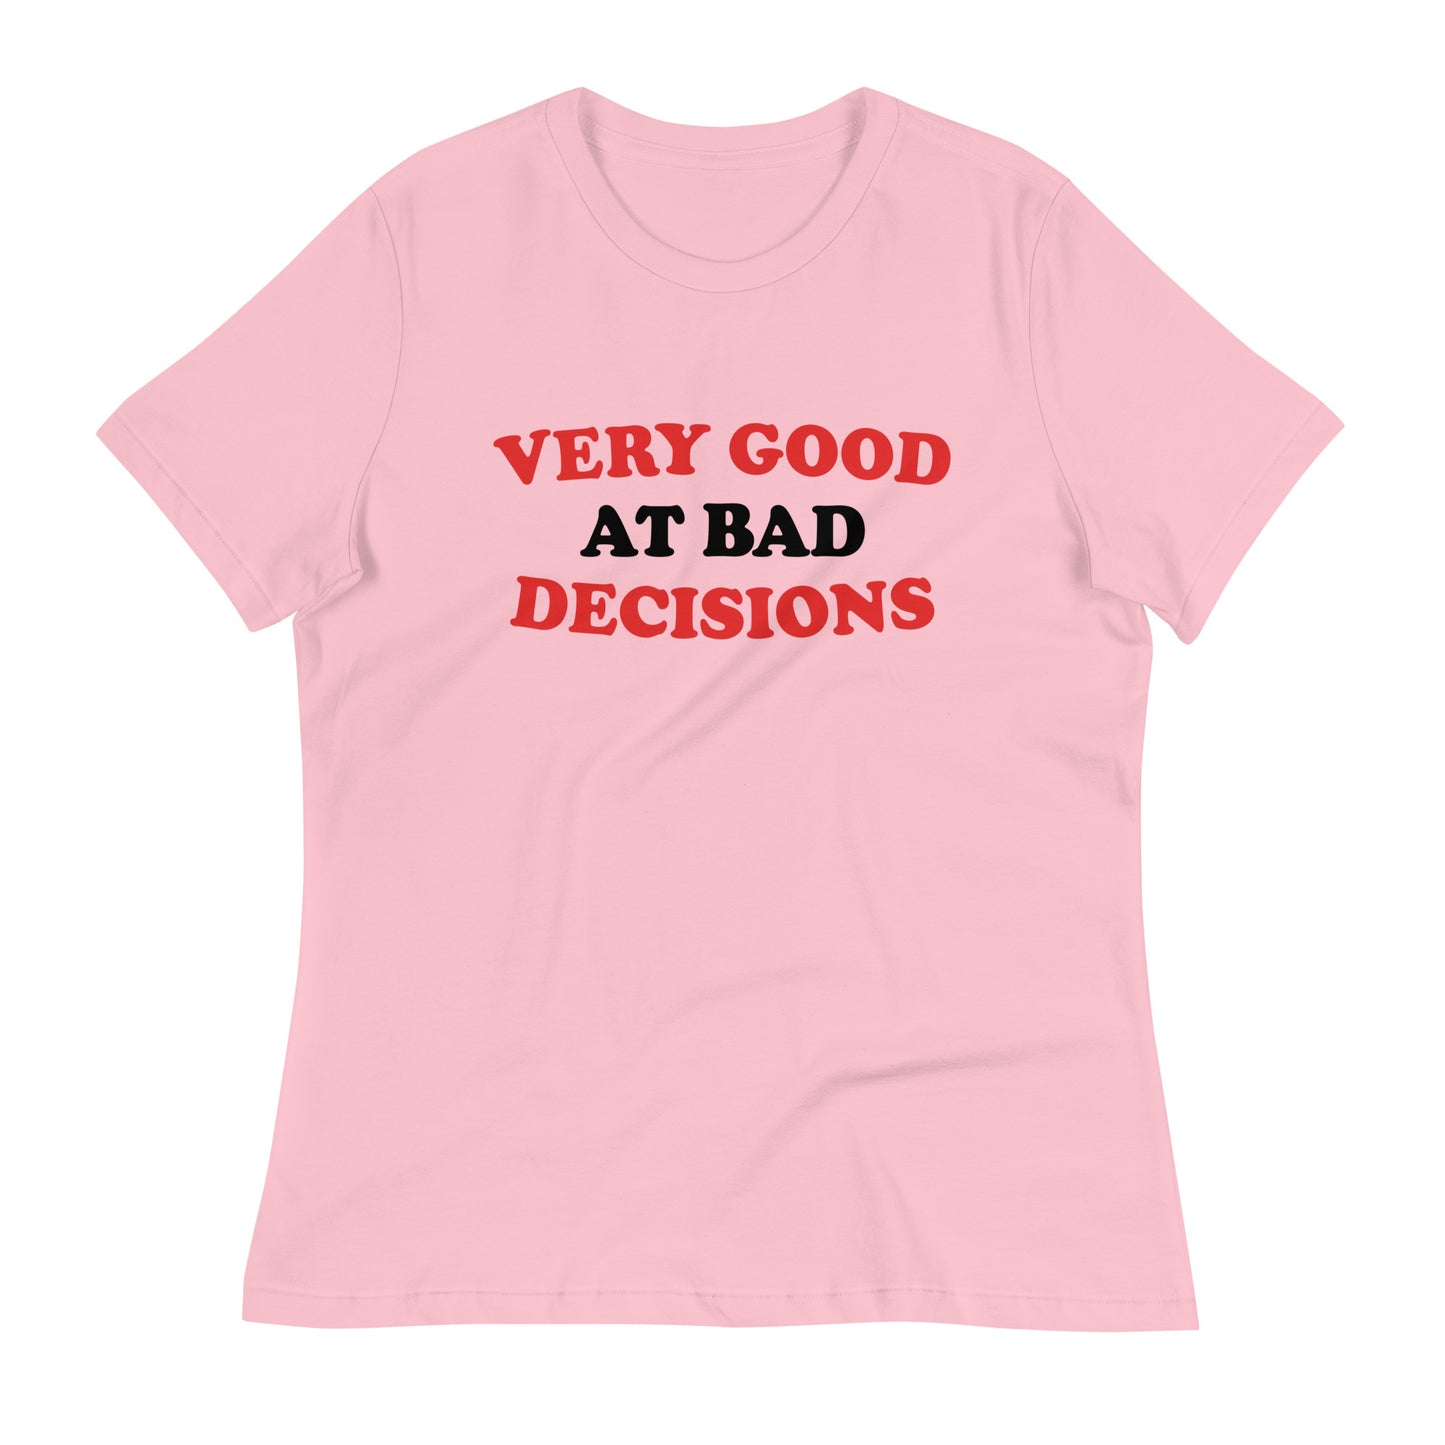 Very Good At Bad Decisions Women's Signature Tee